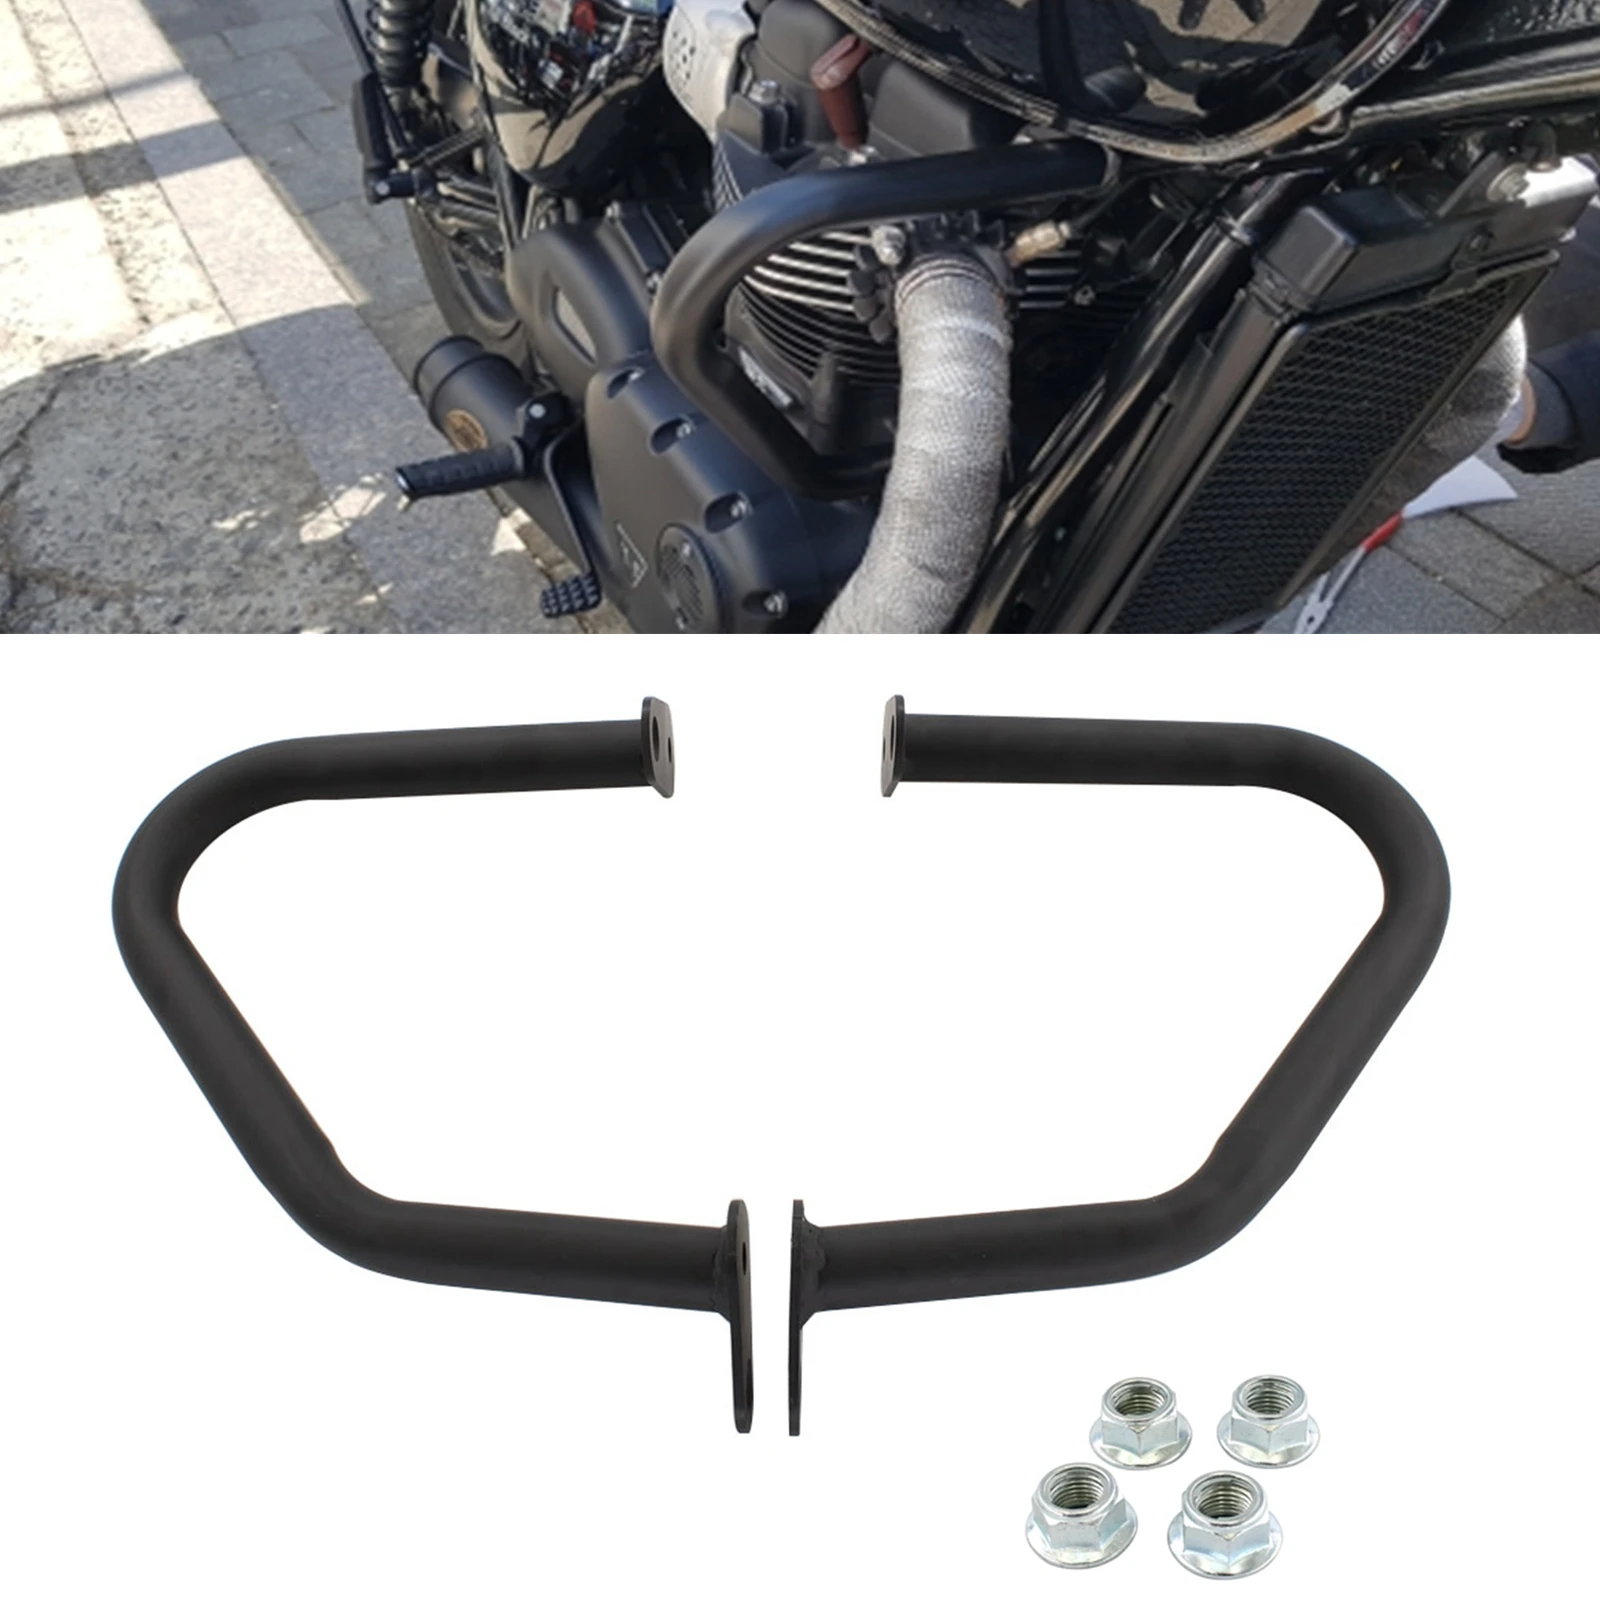 

Motorbike Engine Guard Crash Bar Protector Replacement For Triumph Bonneville T100 T120 Thruxton 1200 Street Cup Twin 2006-2020